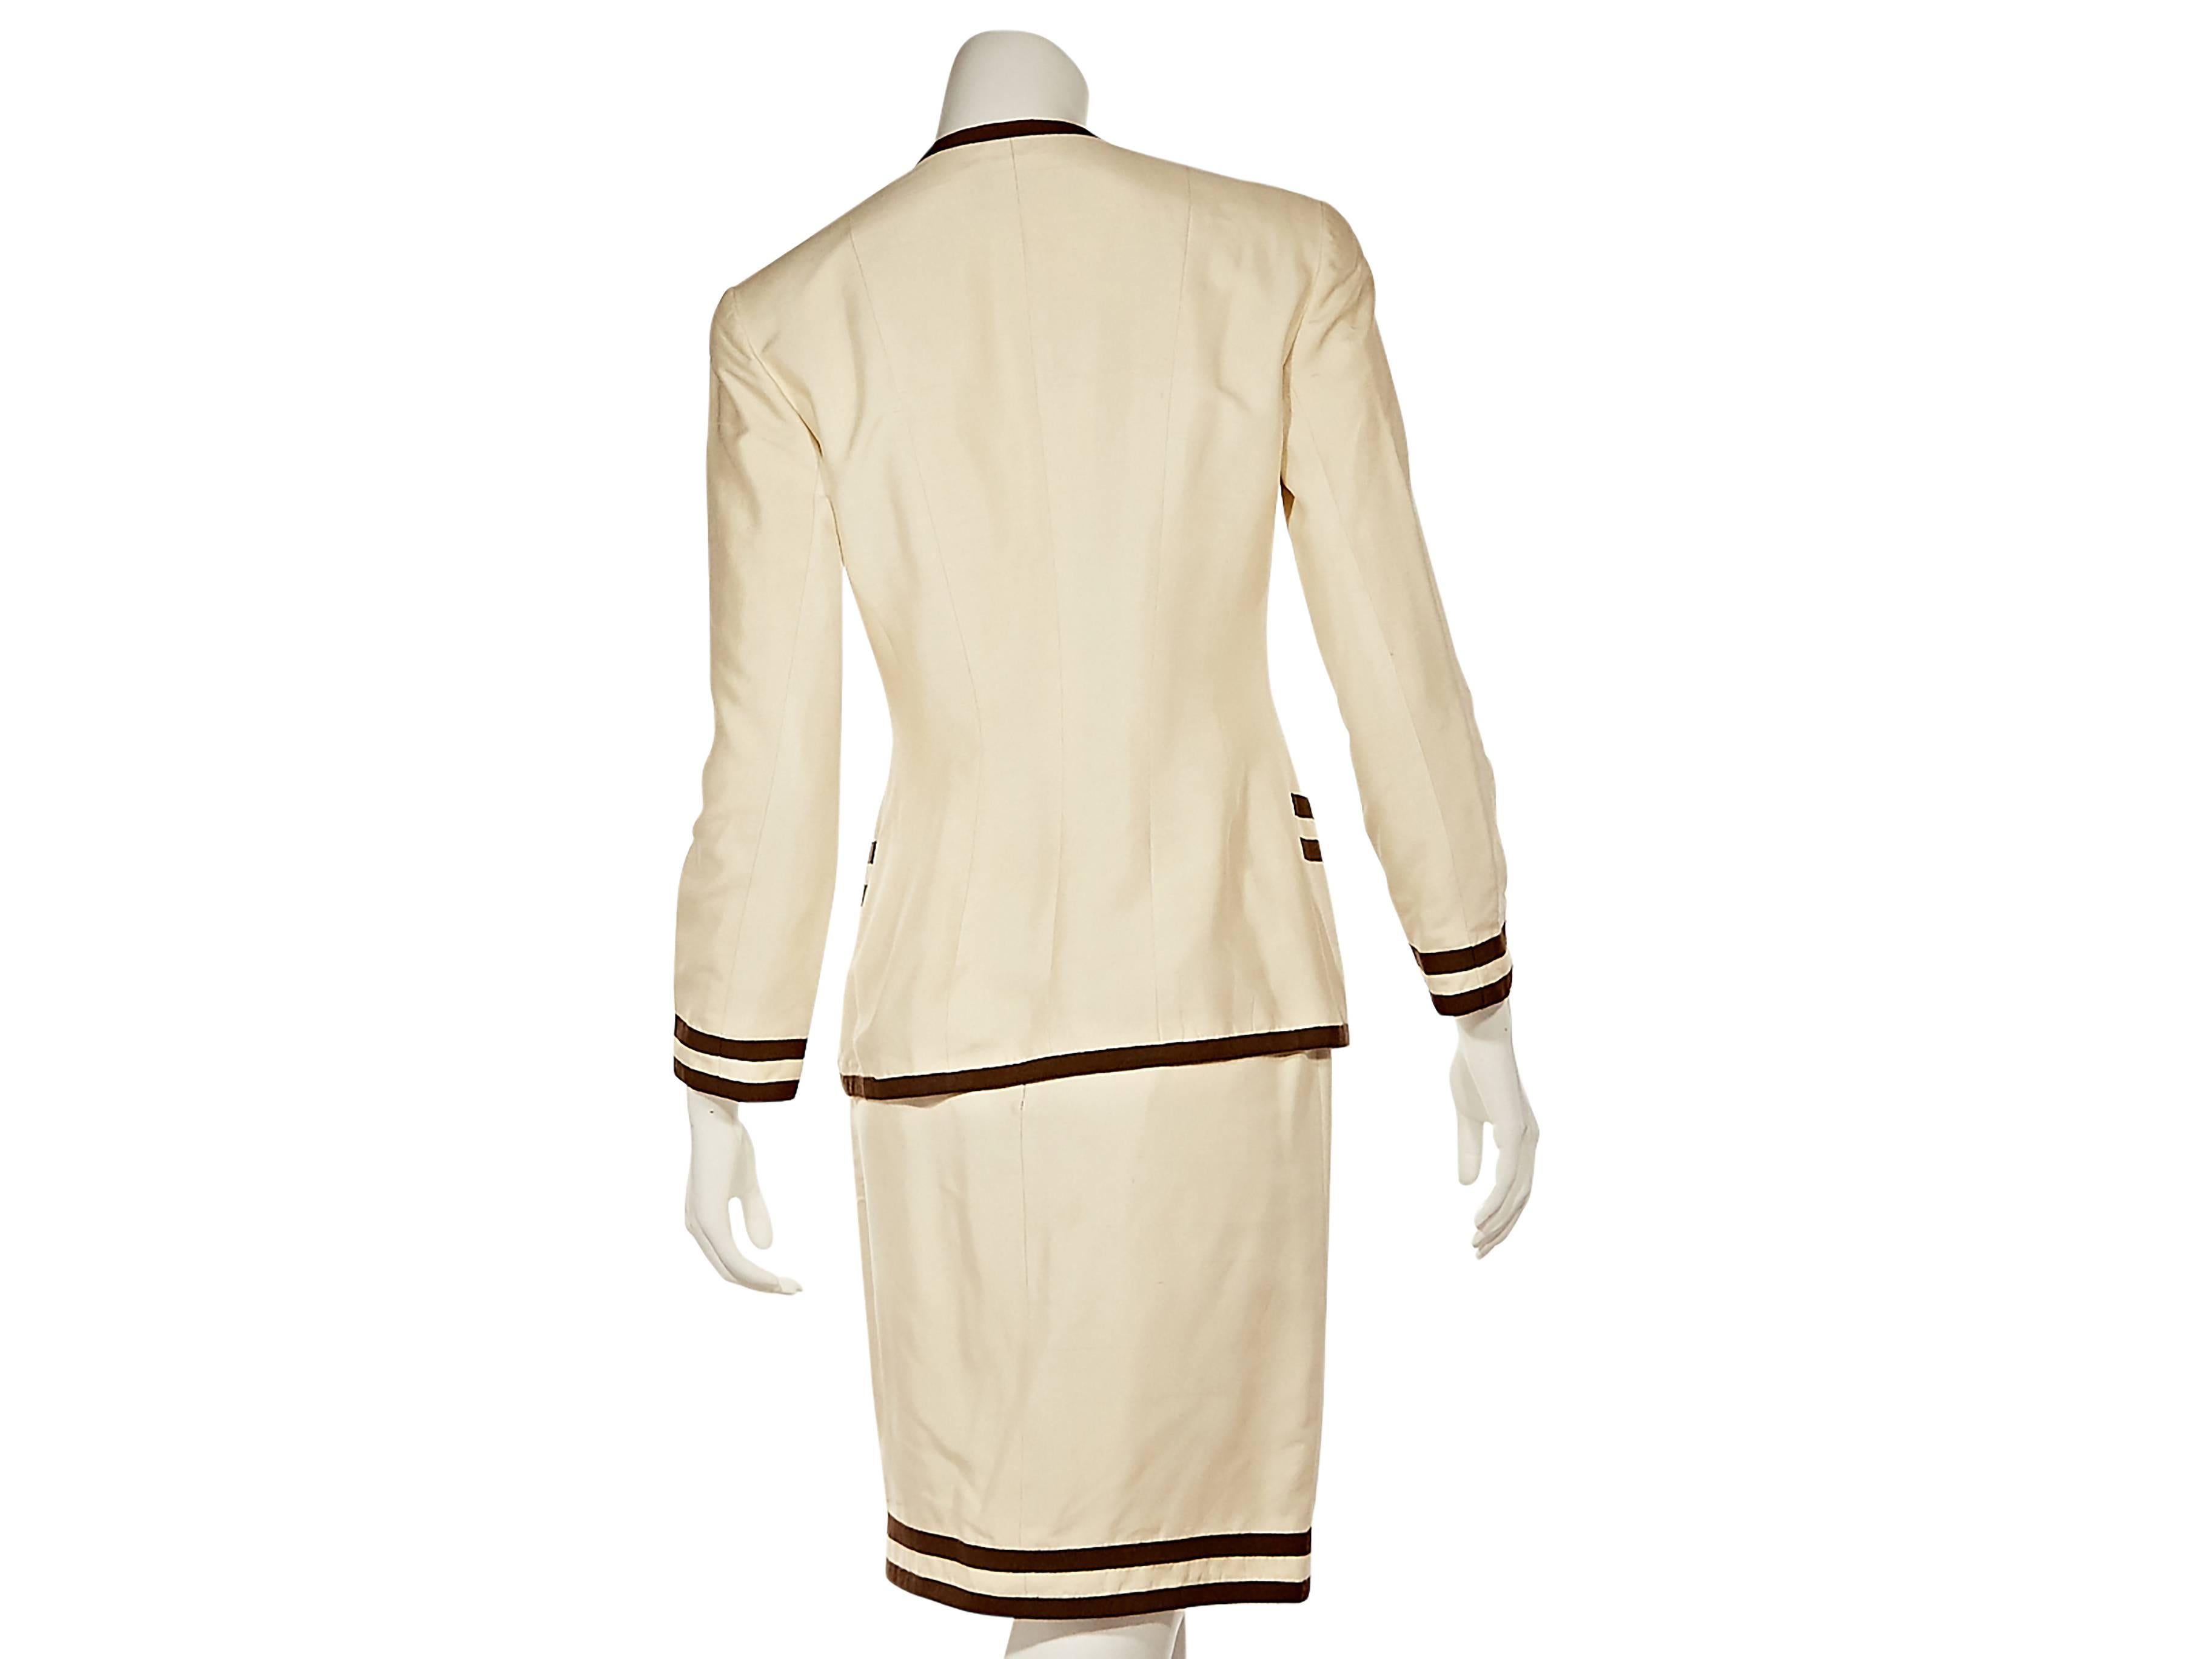 Product details:   Beige and brown skirt suit set by Chanel.  V-neck.  Button-front closure.  Four patch pockets.  Matching pencil skirt. 
Condition: Excellent.  